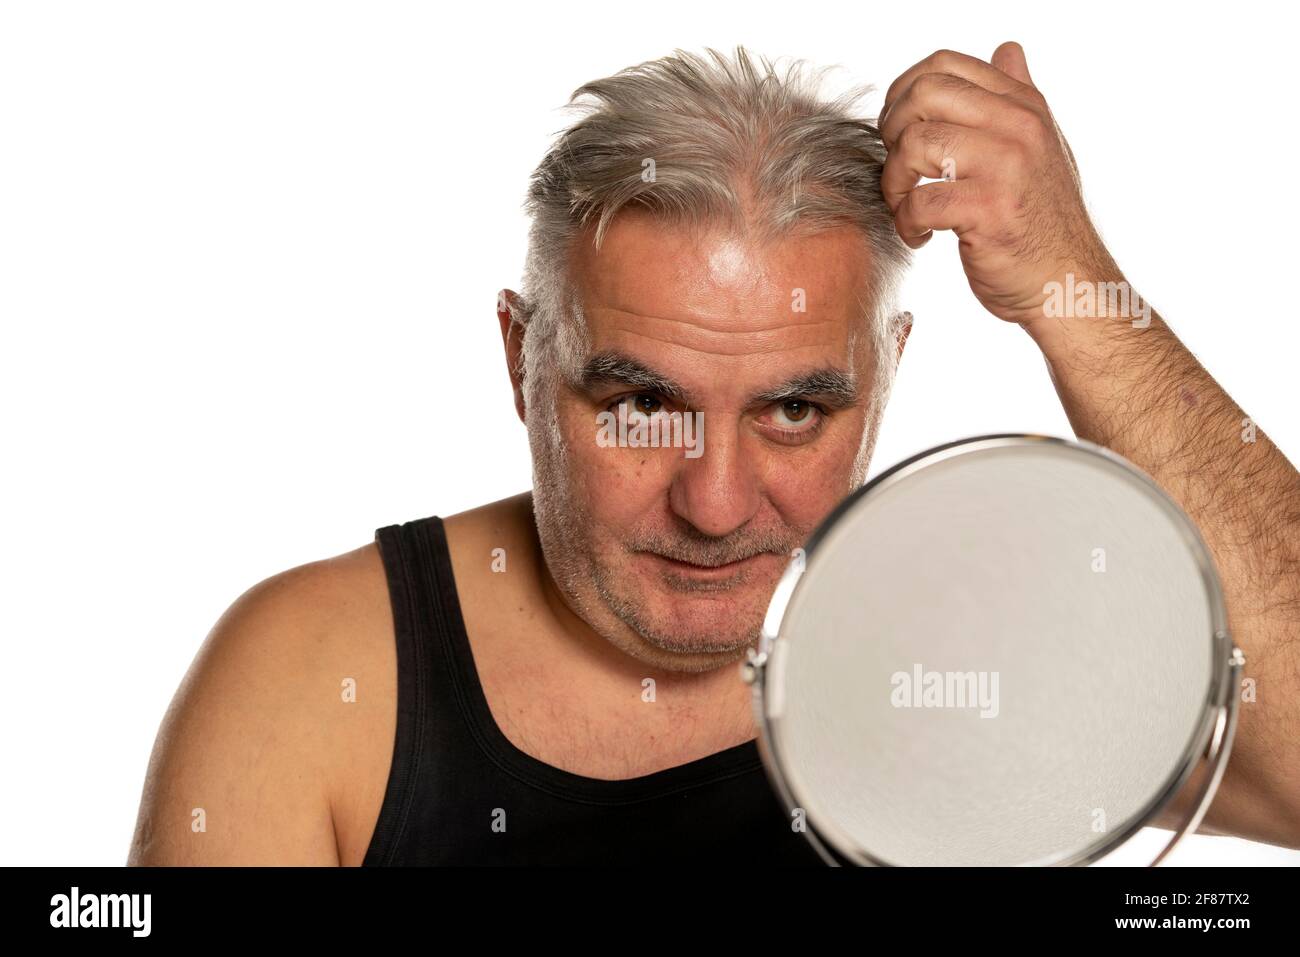 concerned middle aged man with short gray hair on white background Stock Photo